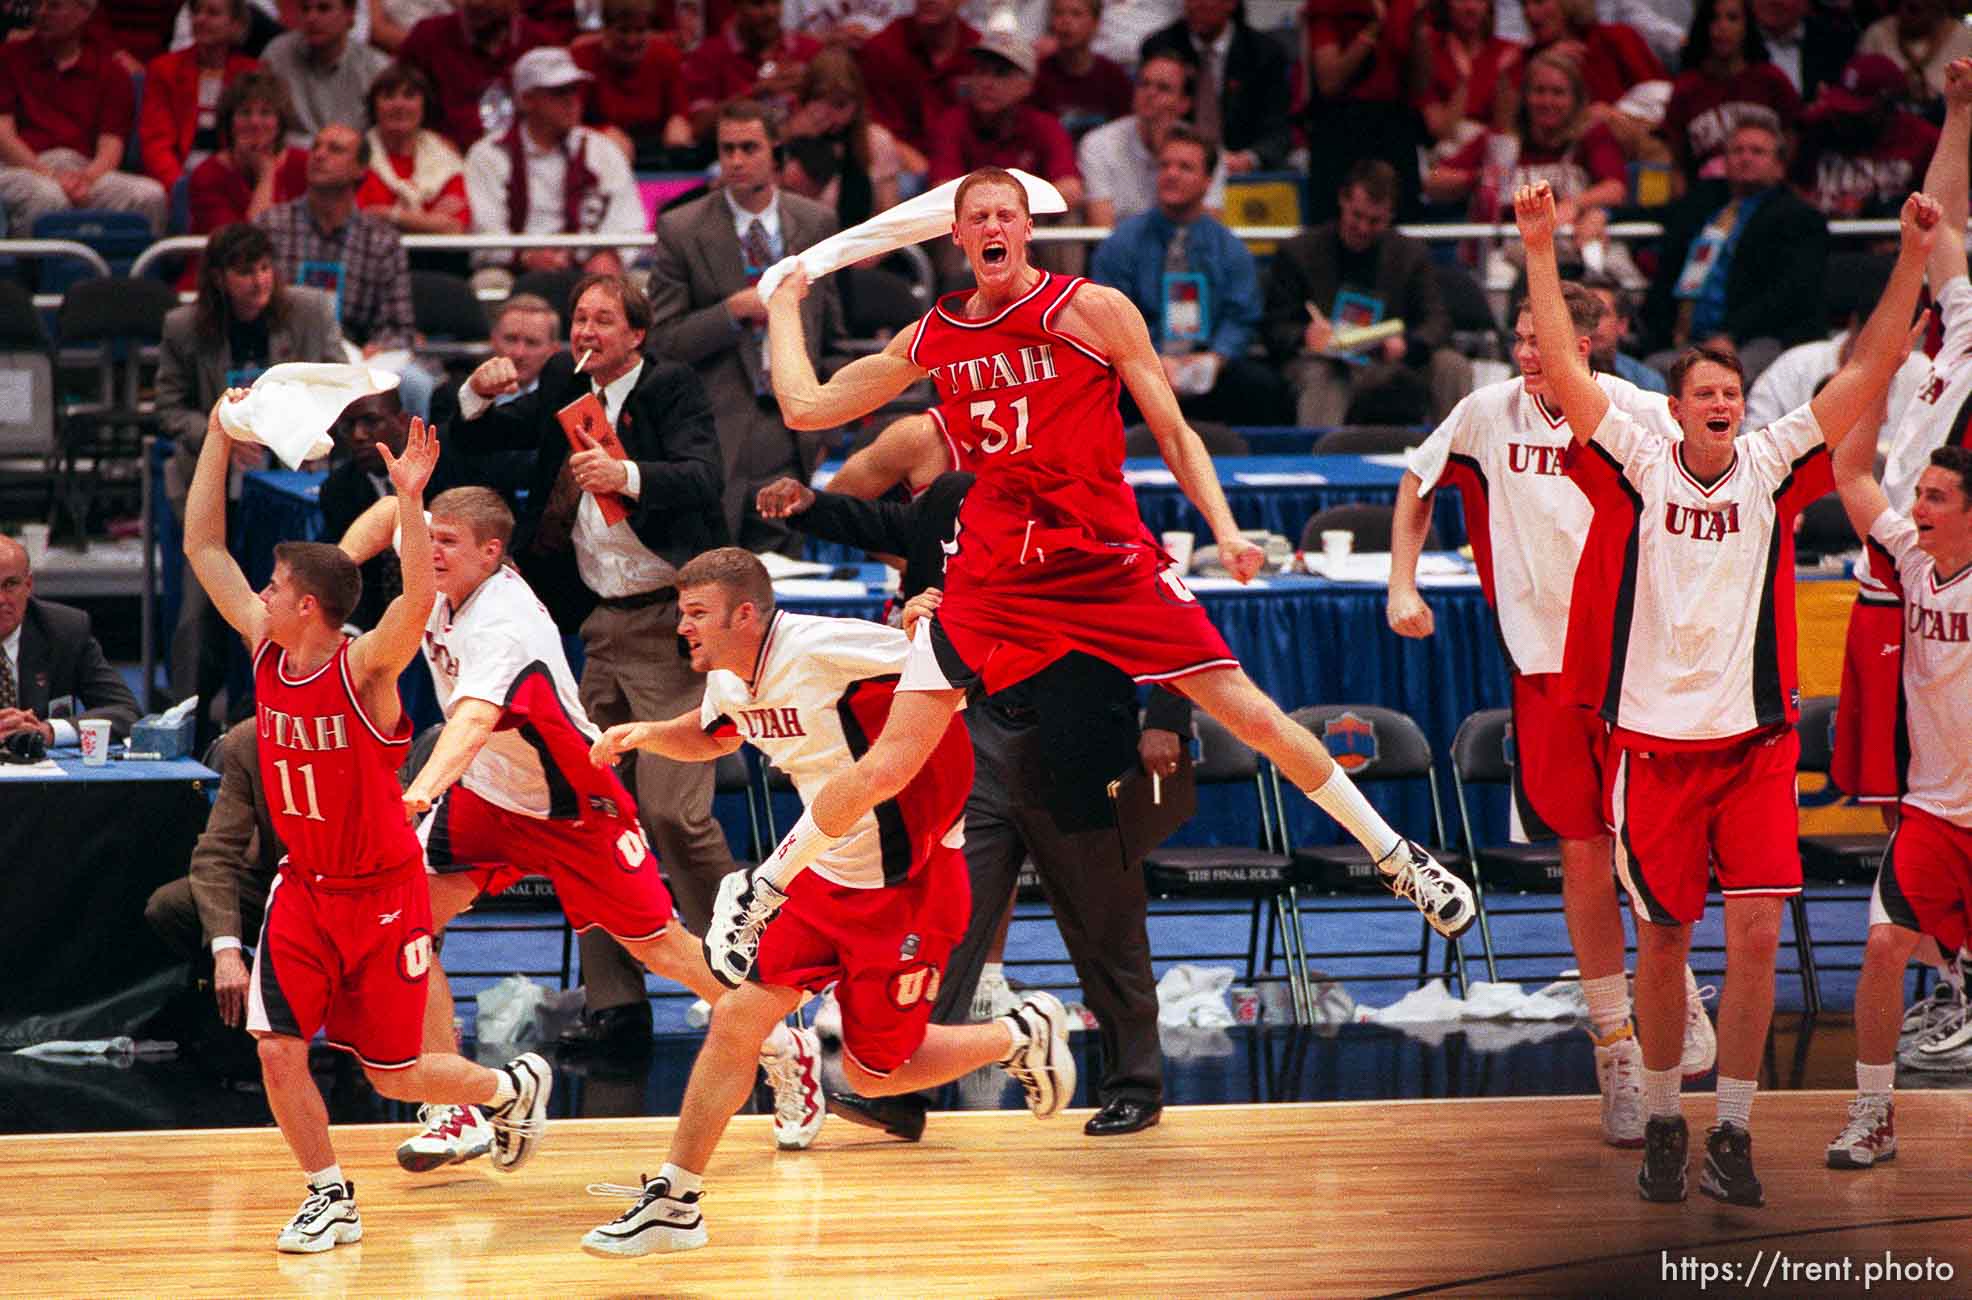 Utah players celebrate their victory over #1 seed North Carolina in the Final Four. Britton Johnsen is #31.